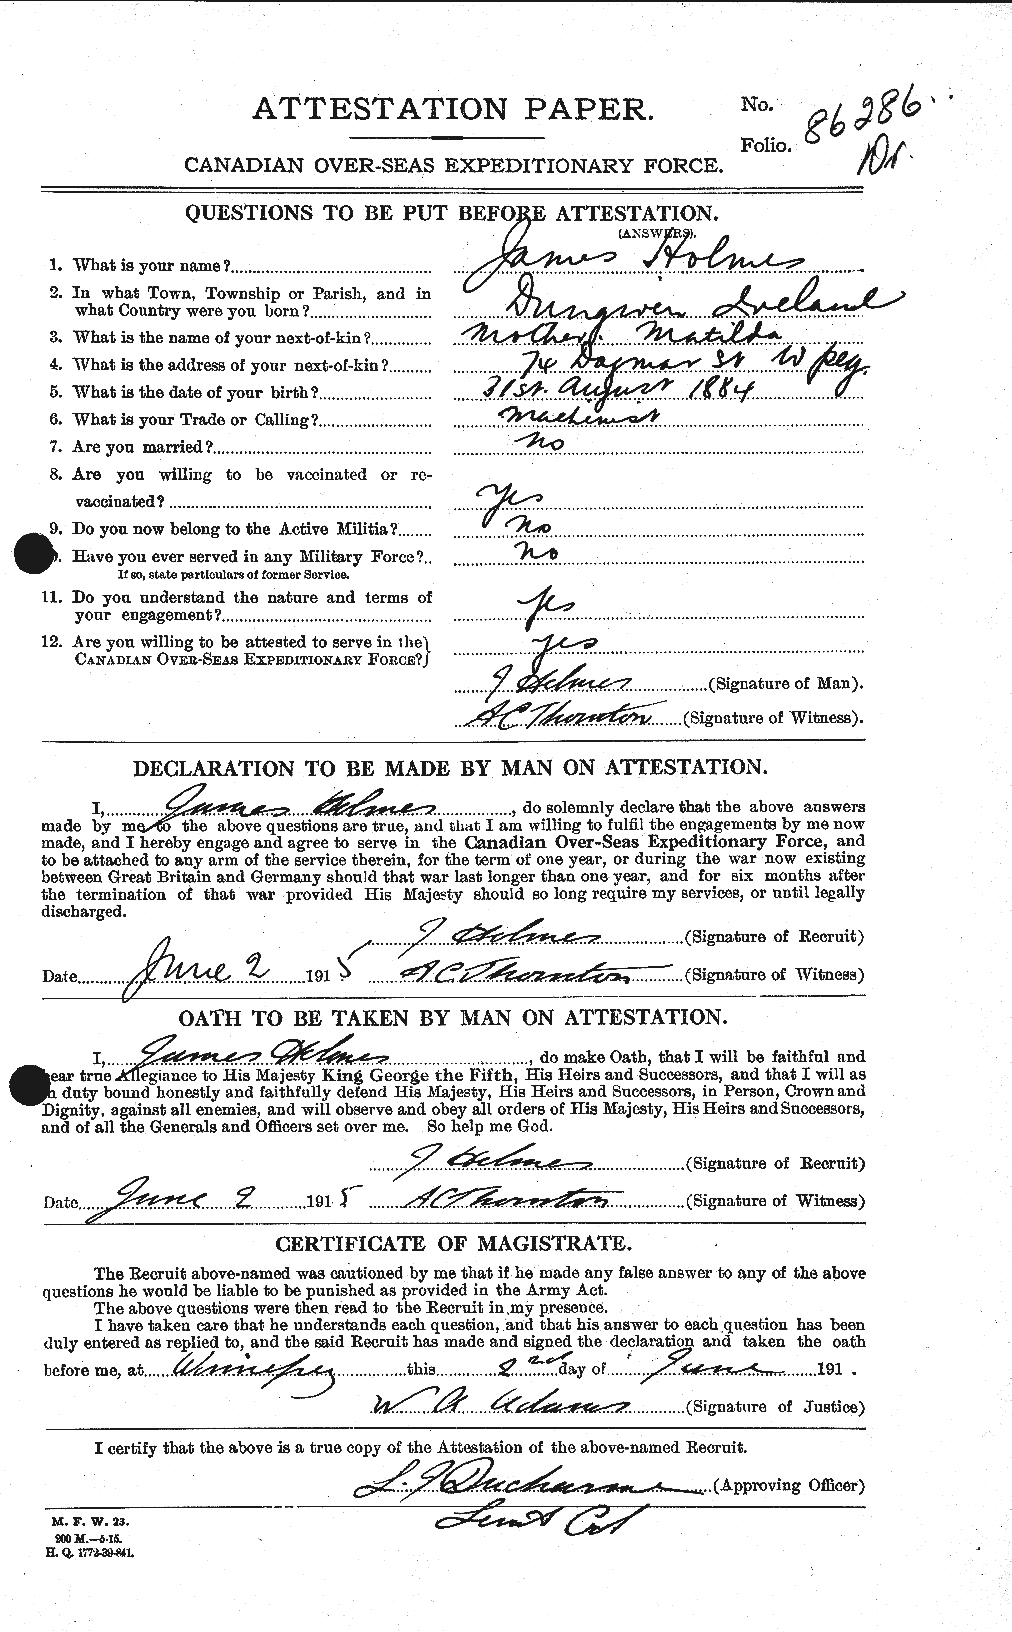 Personnel Records of the First World War - CEF 401762a